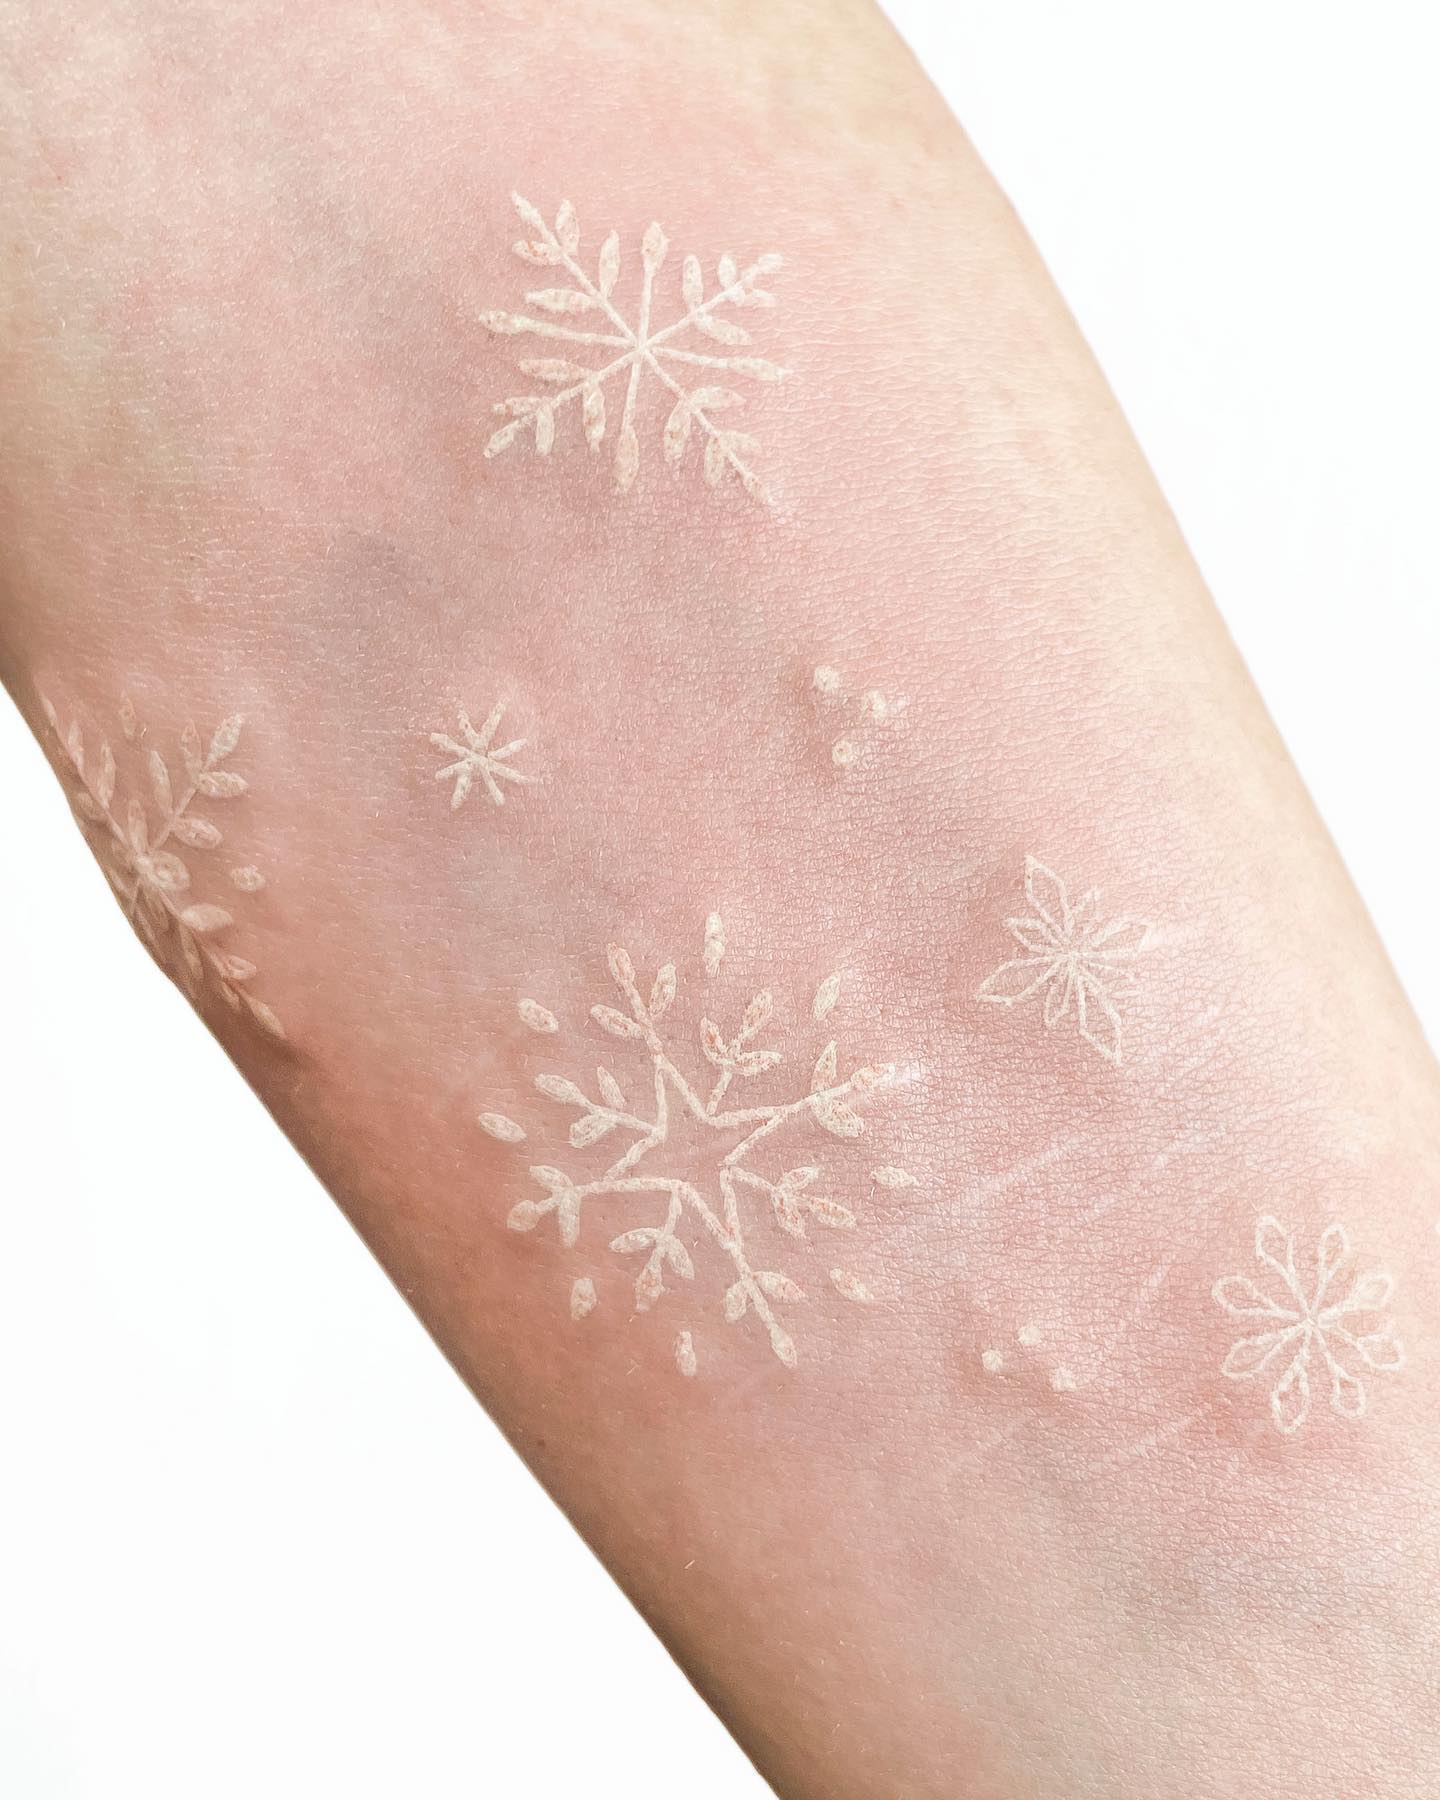 Snowflake white ink tattoos are so beautiful! They have a magical, wintery feel to them. The shimmering white ink makes the tattoo look like snowflakes falling down your arm, which is amazing.